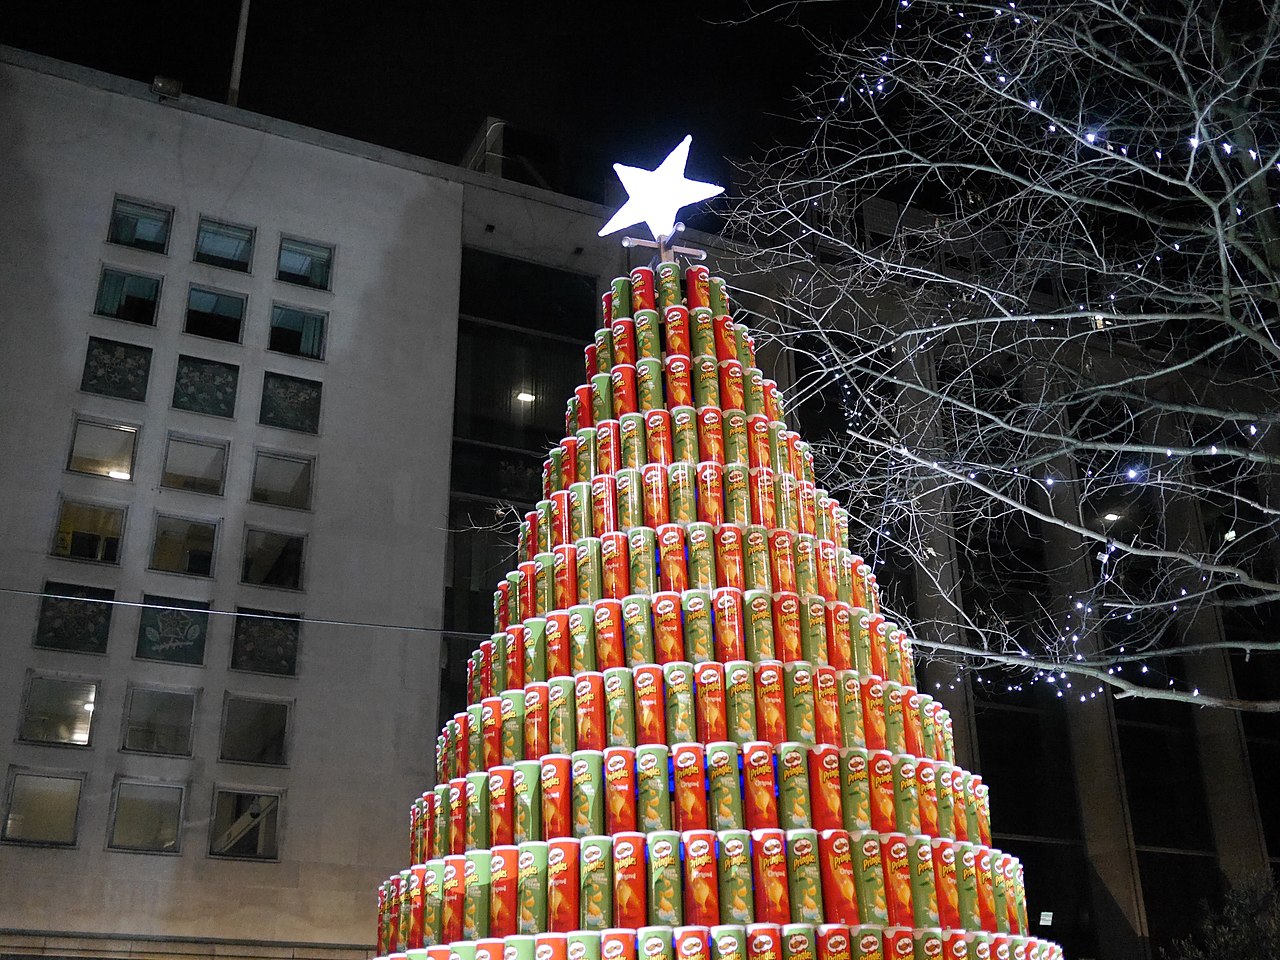 Pringles Christmas tree in Spinningfields, Manchester, England in 2014